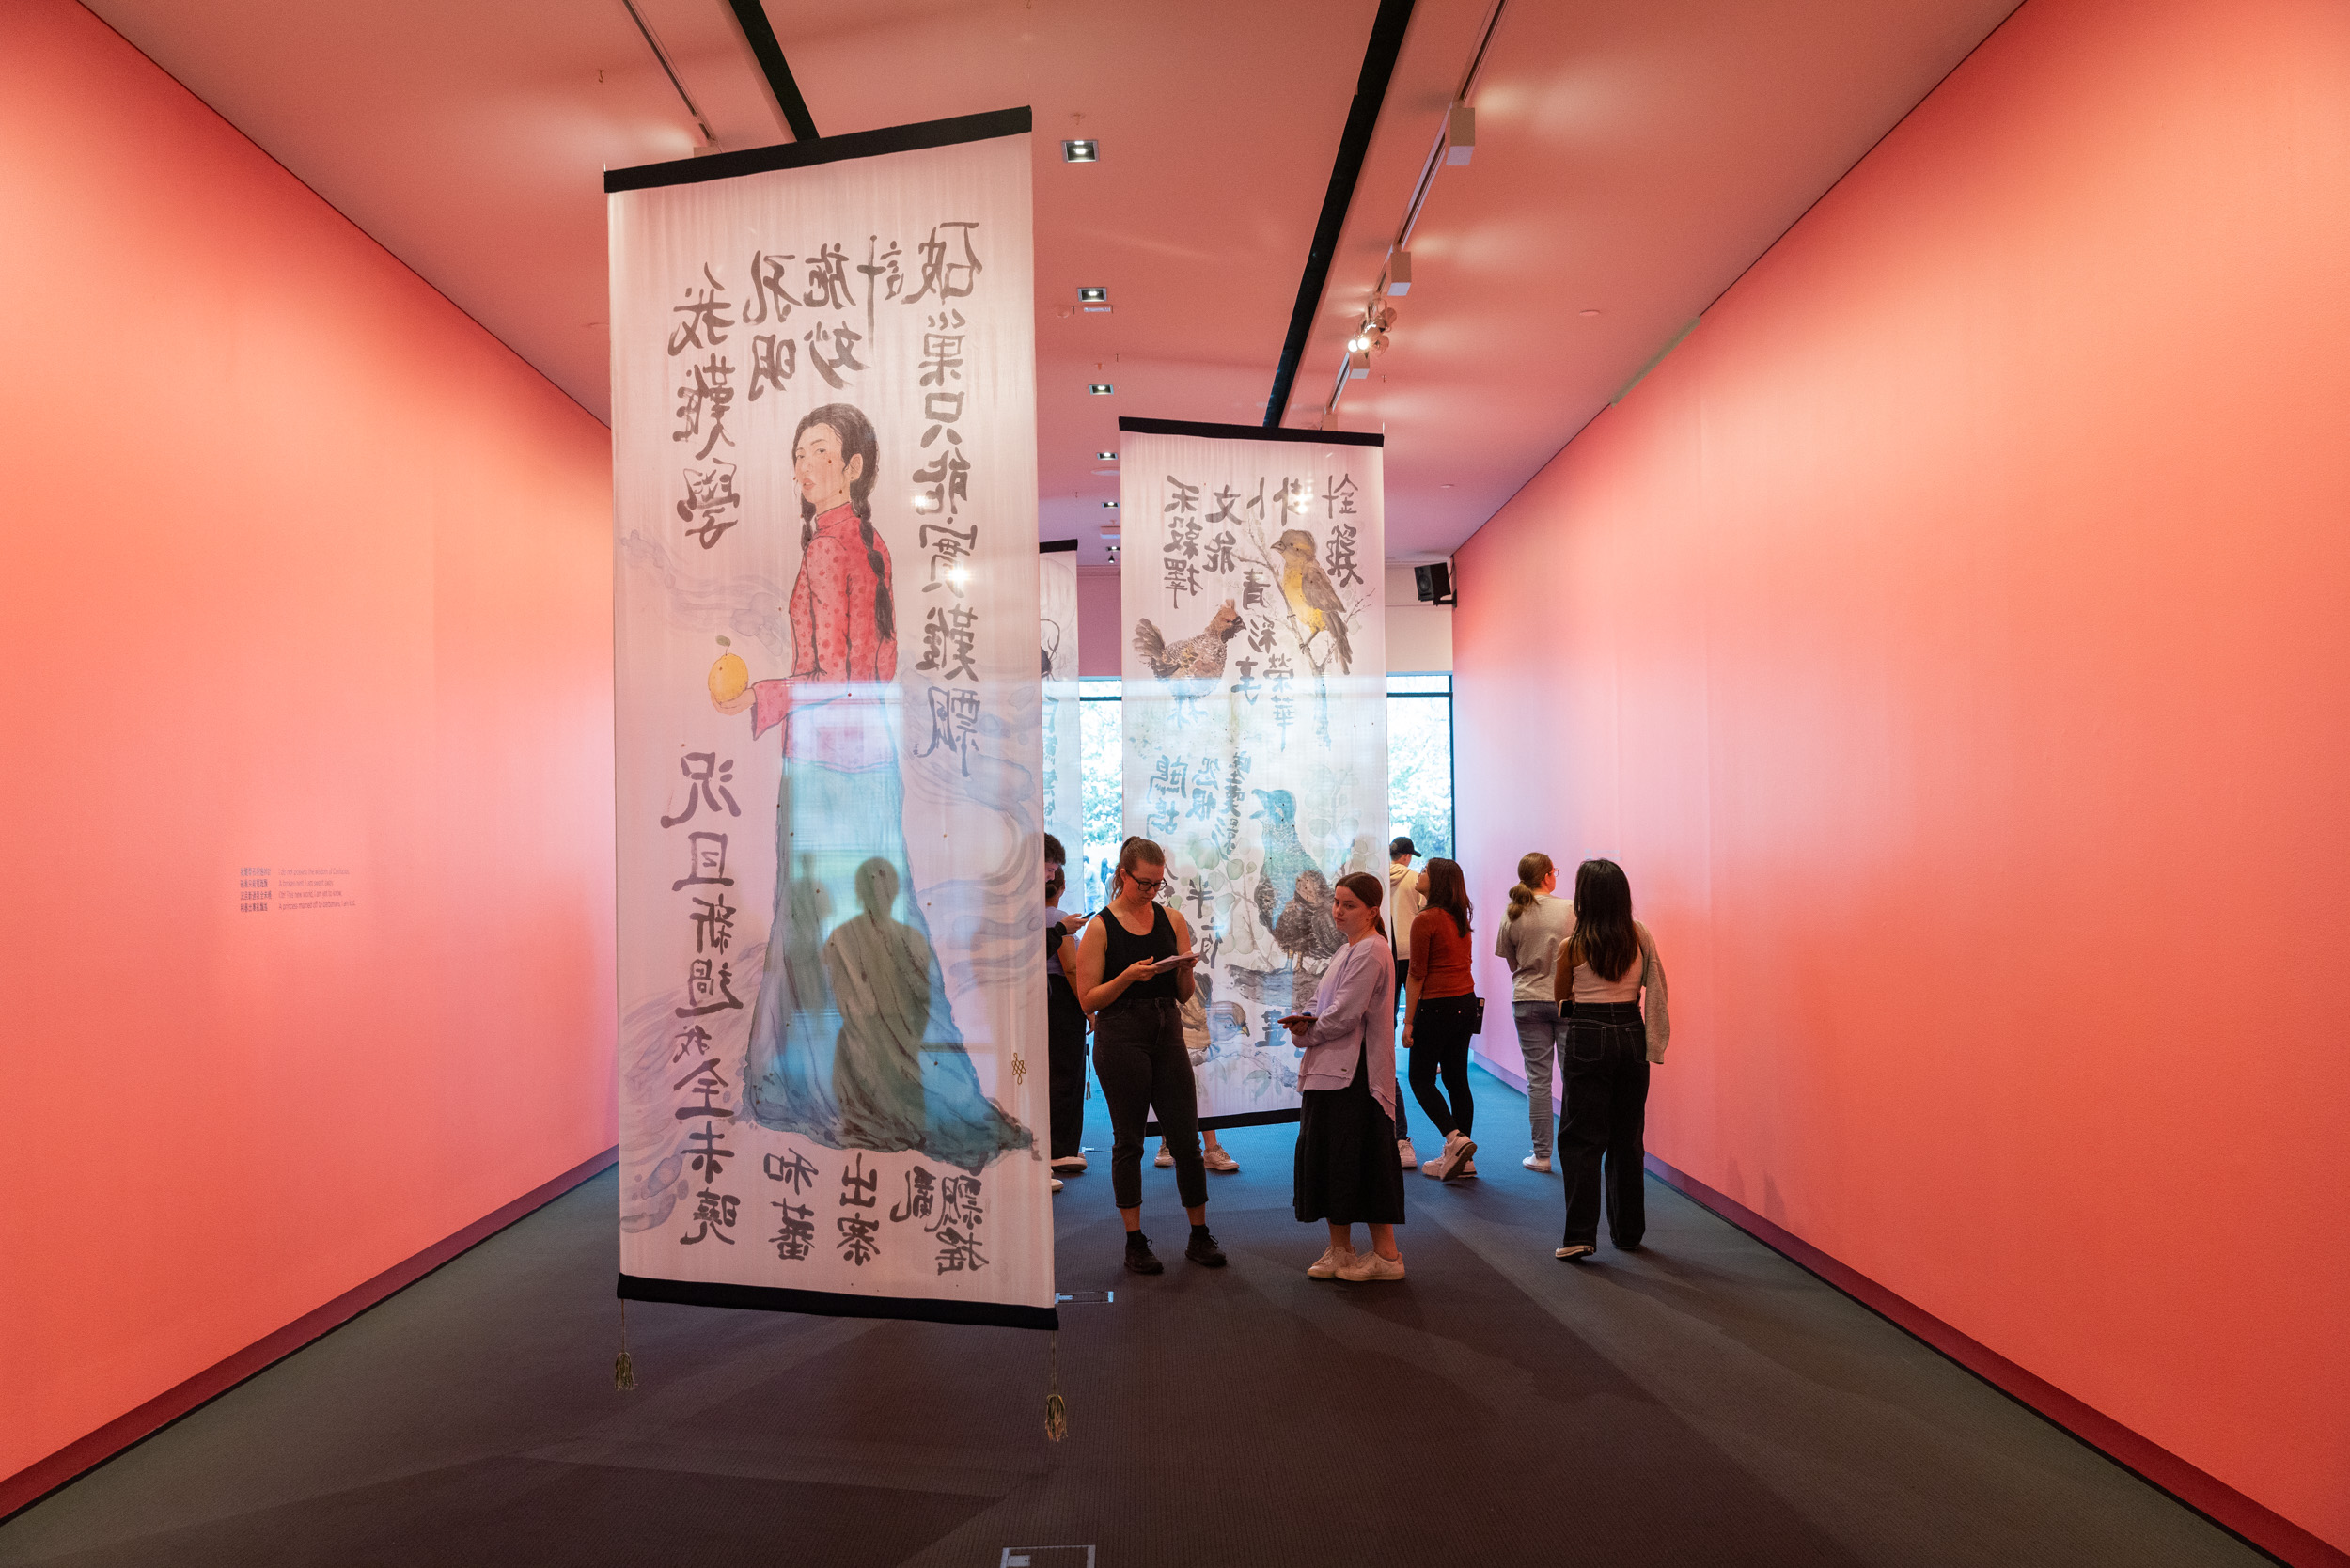 Artwork “The novice, fry and fledging" by artist Chun Yin Rainbow Chan installed in UQ Art Museum exhibition “Mare Amoris | Sea of Love”. 